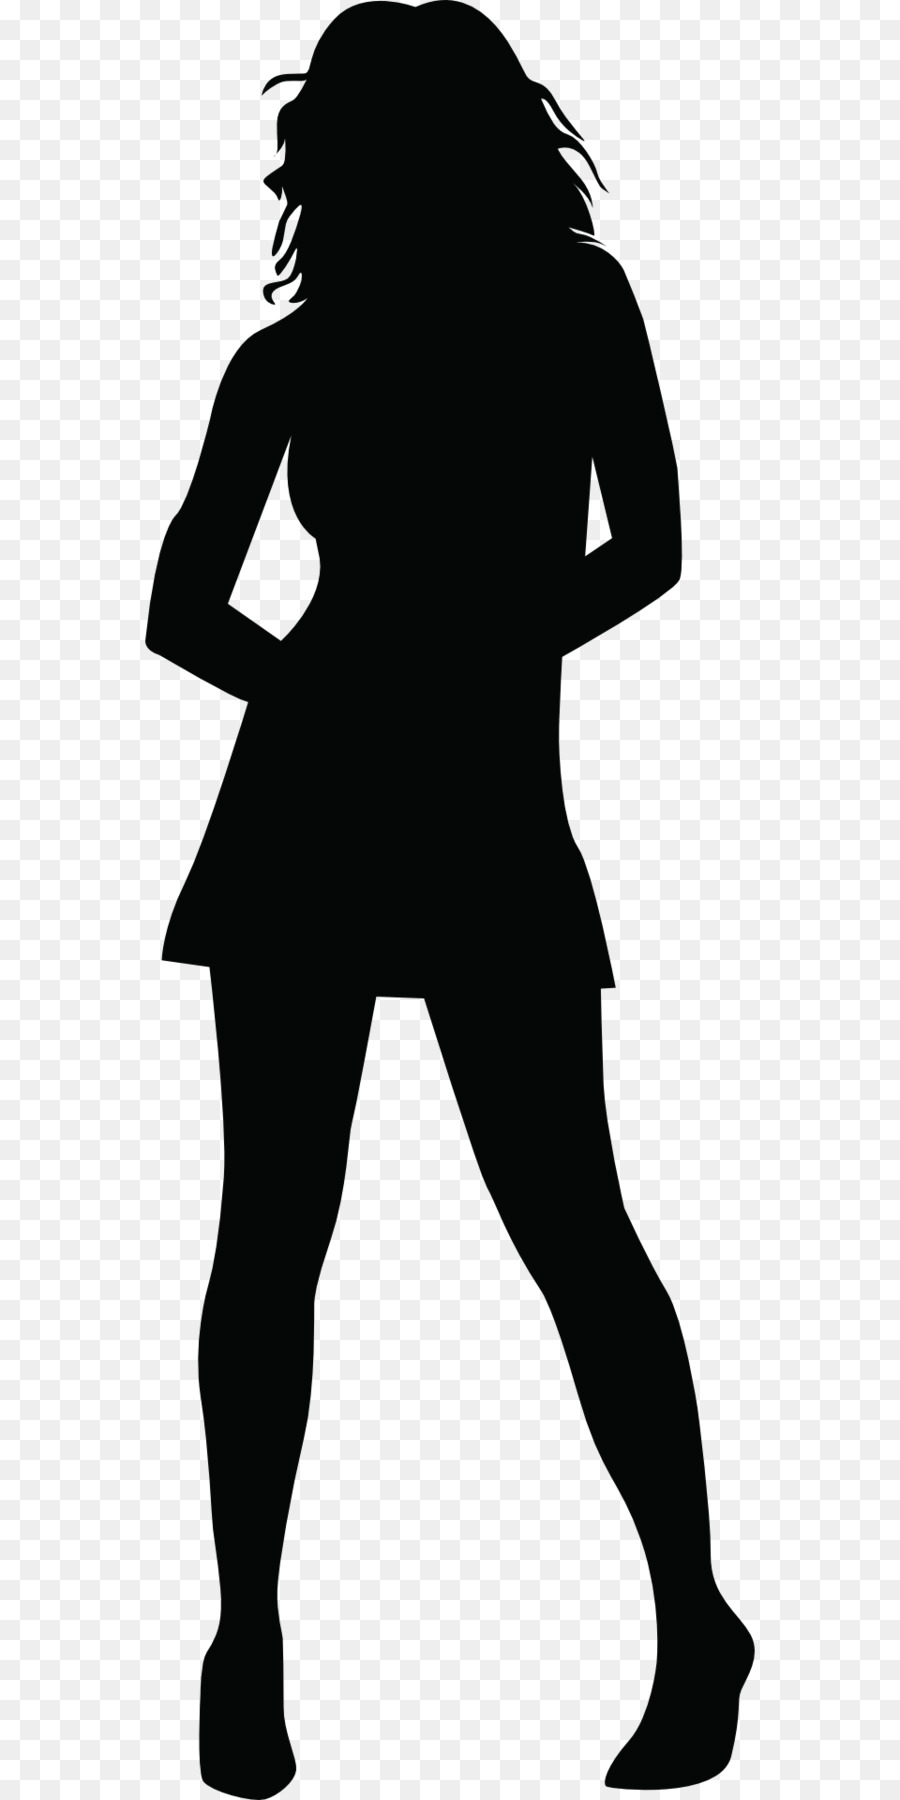 Silhouette Woman Clip art - woman silhouette png download - 960*1920 - Free Transparent  png Download.